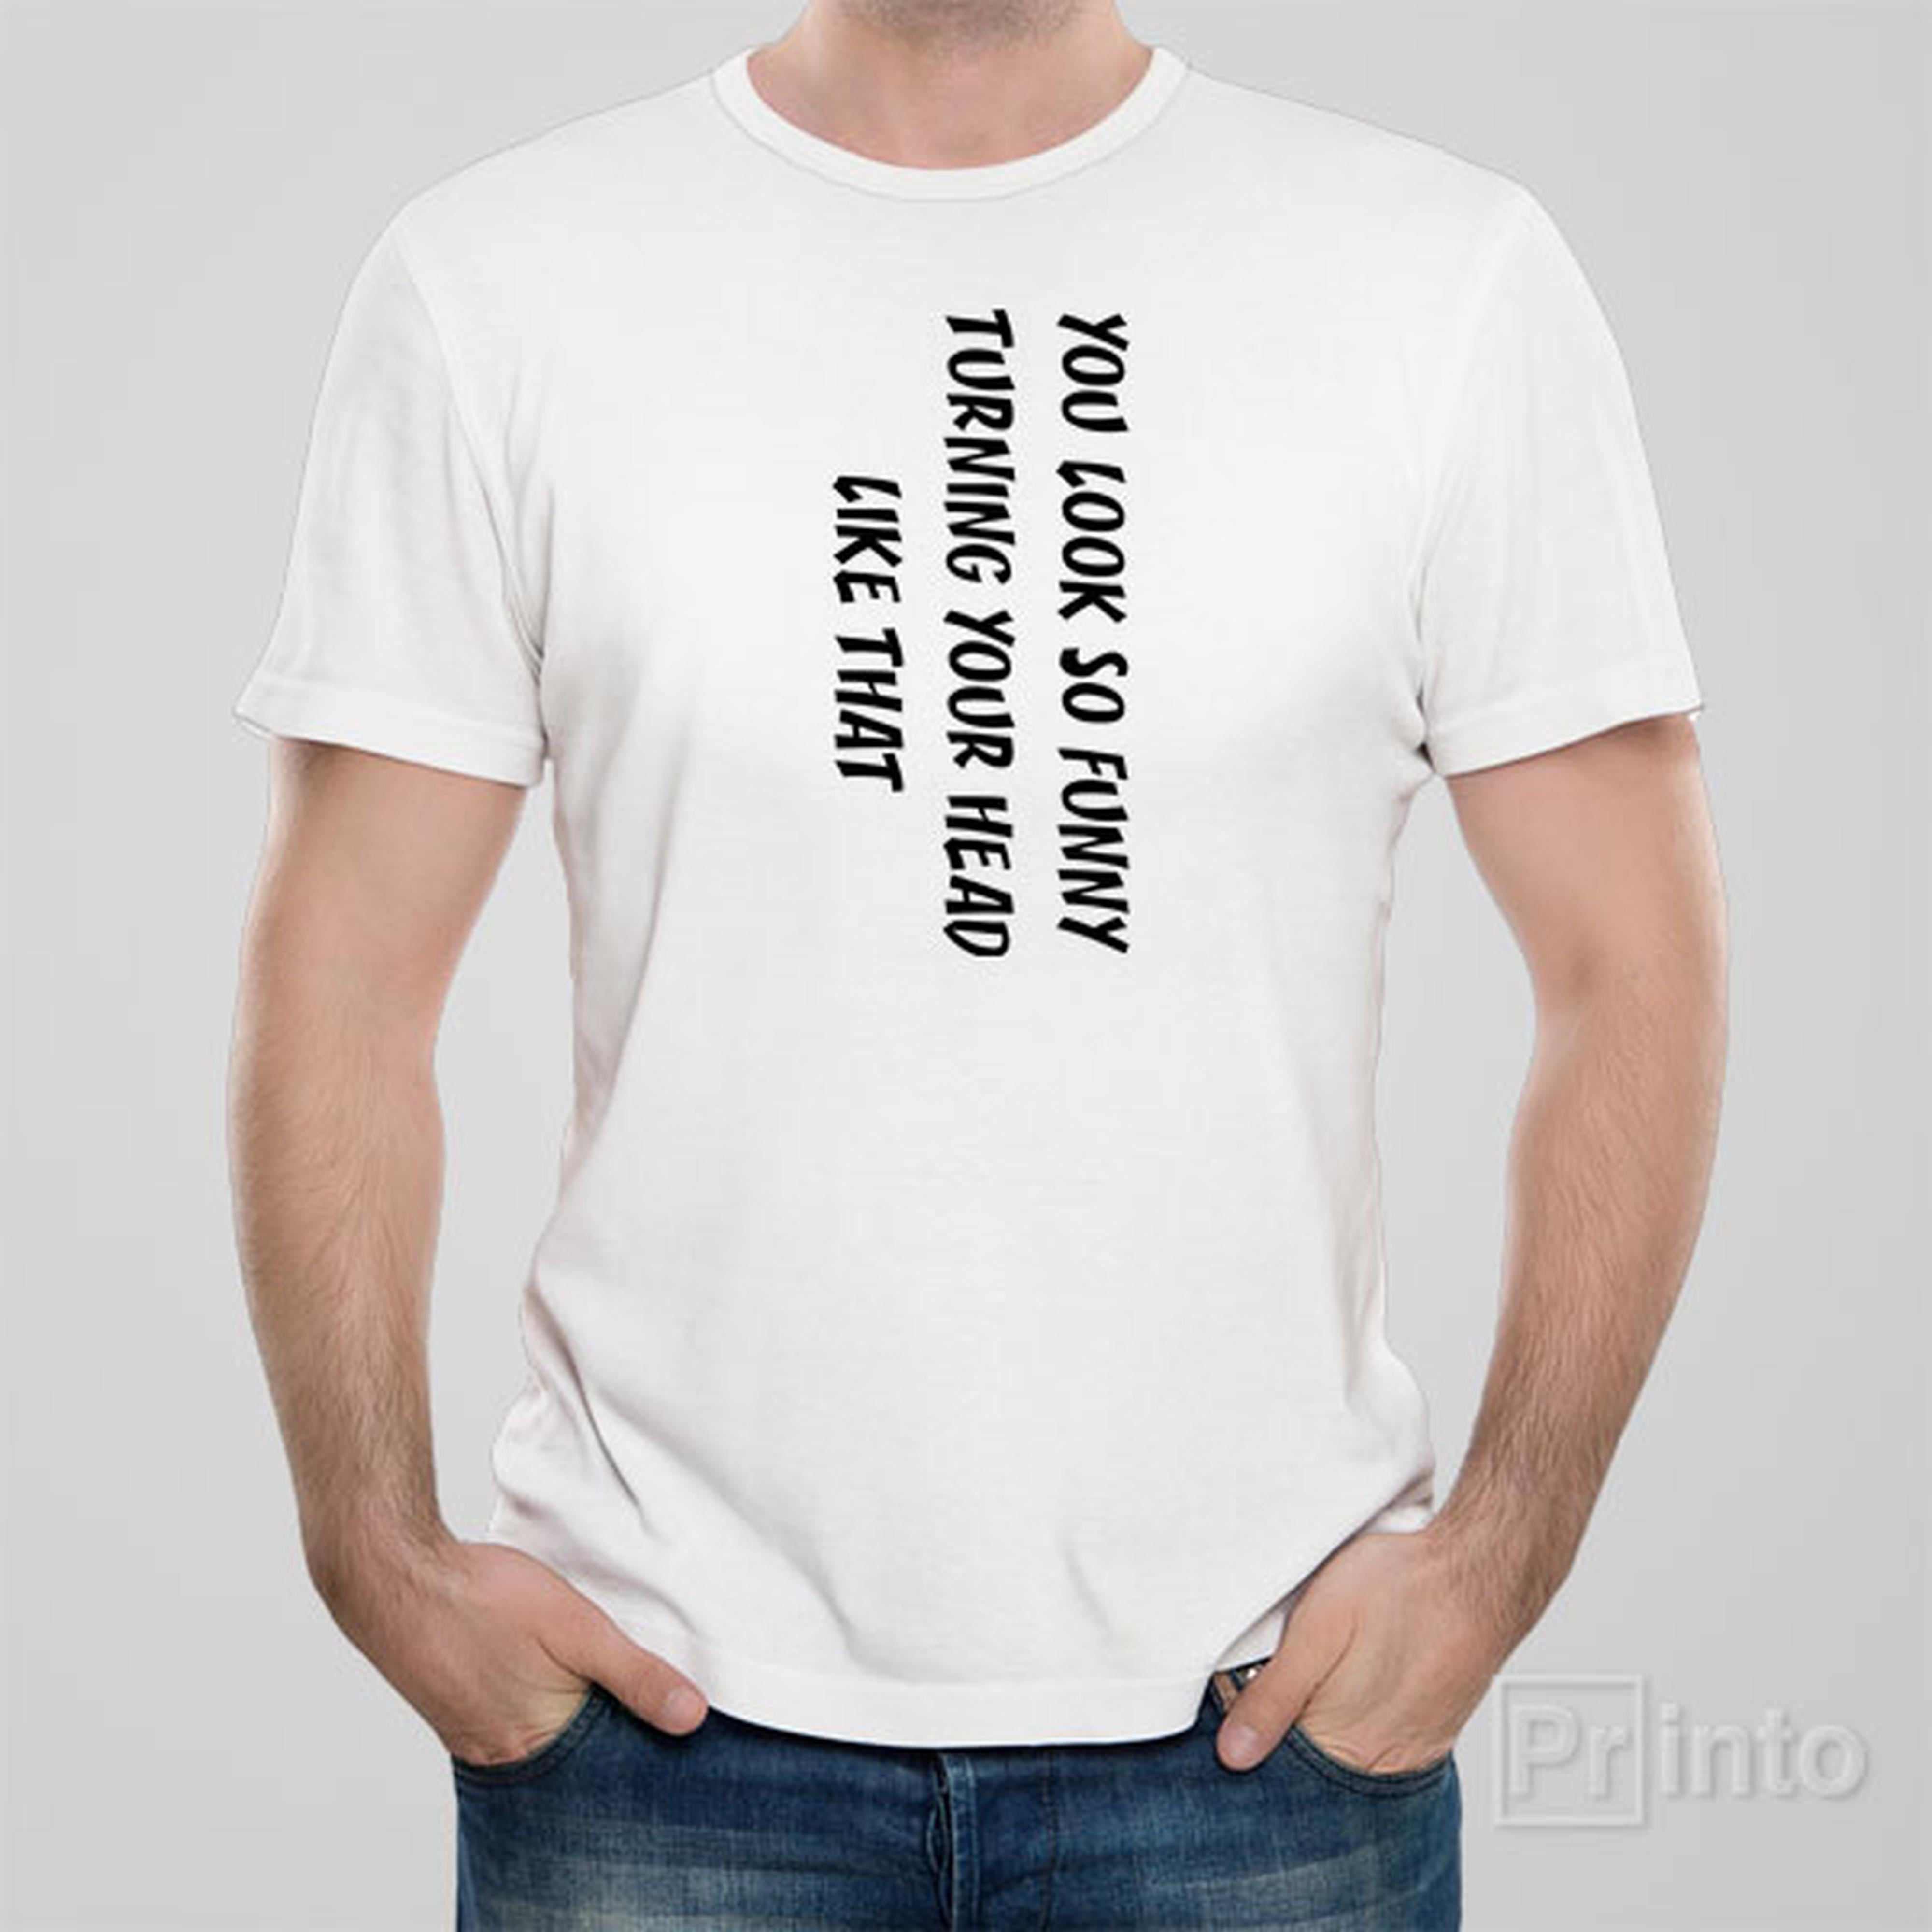 you-look-so-funny-turning-your-head-like-that-t-shirt